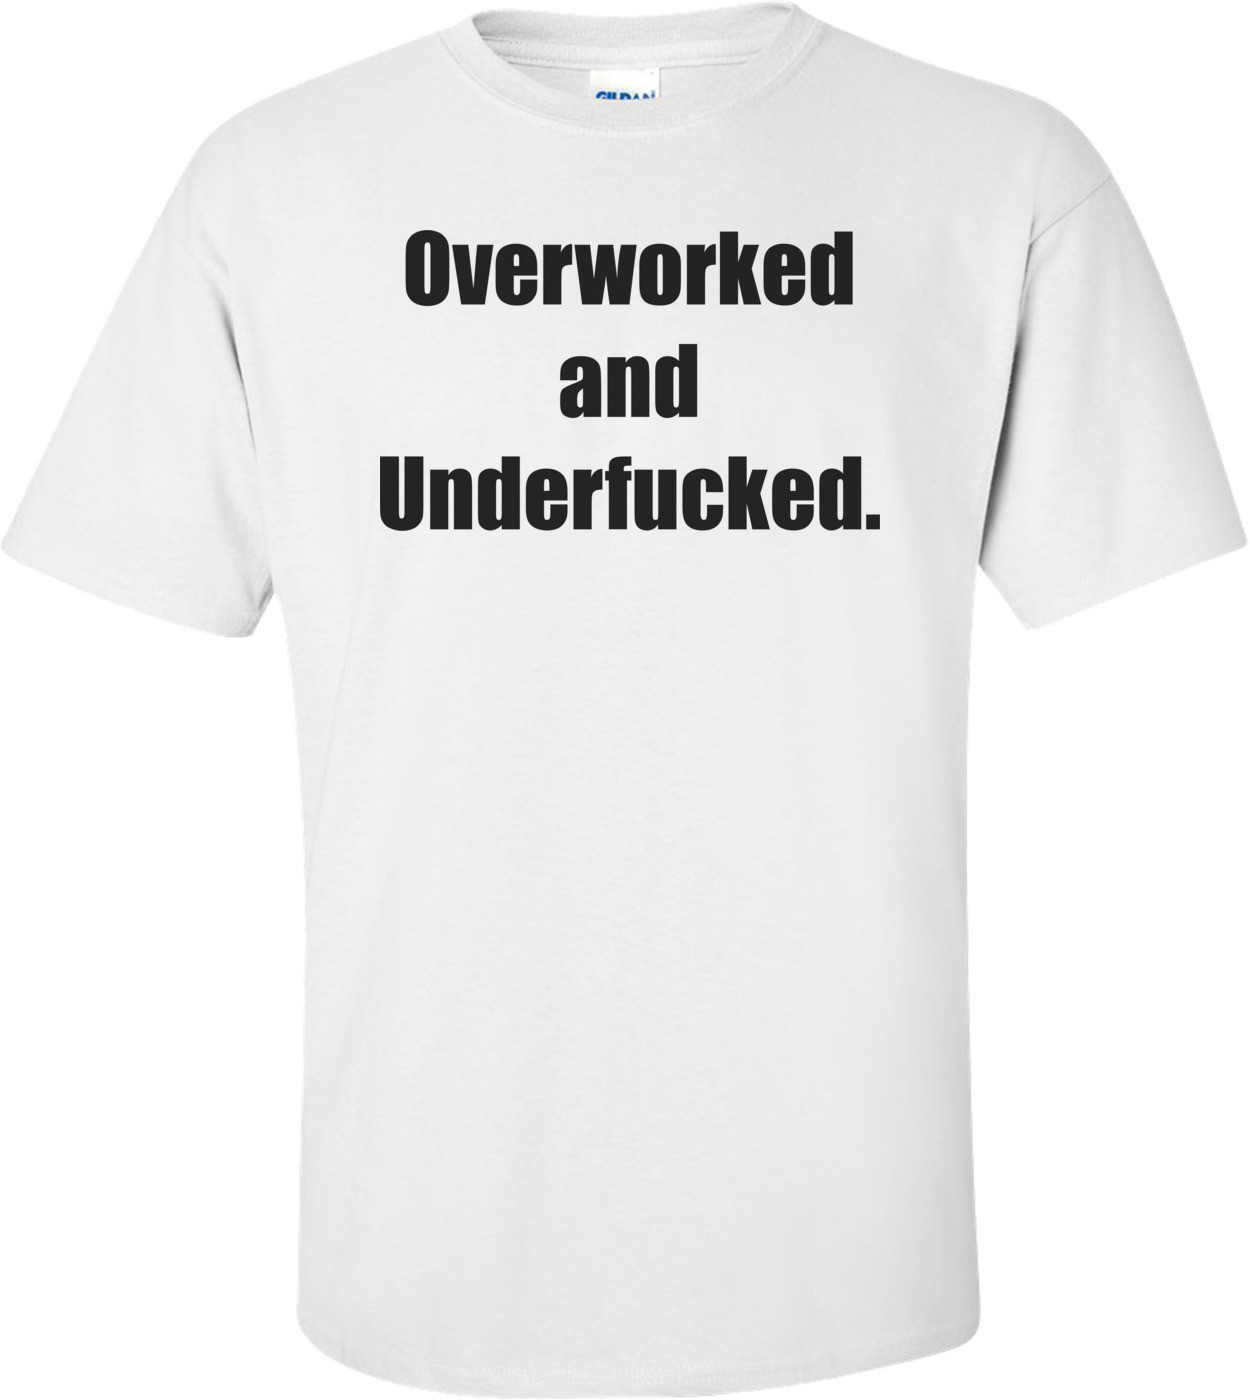 Overworked and Underfucked.